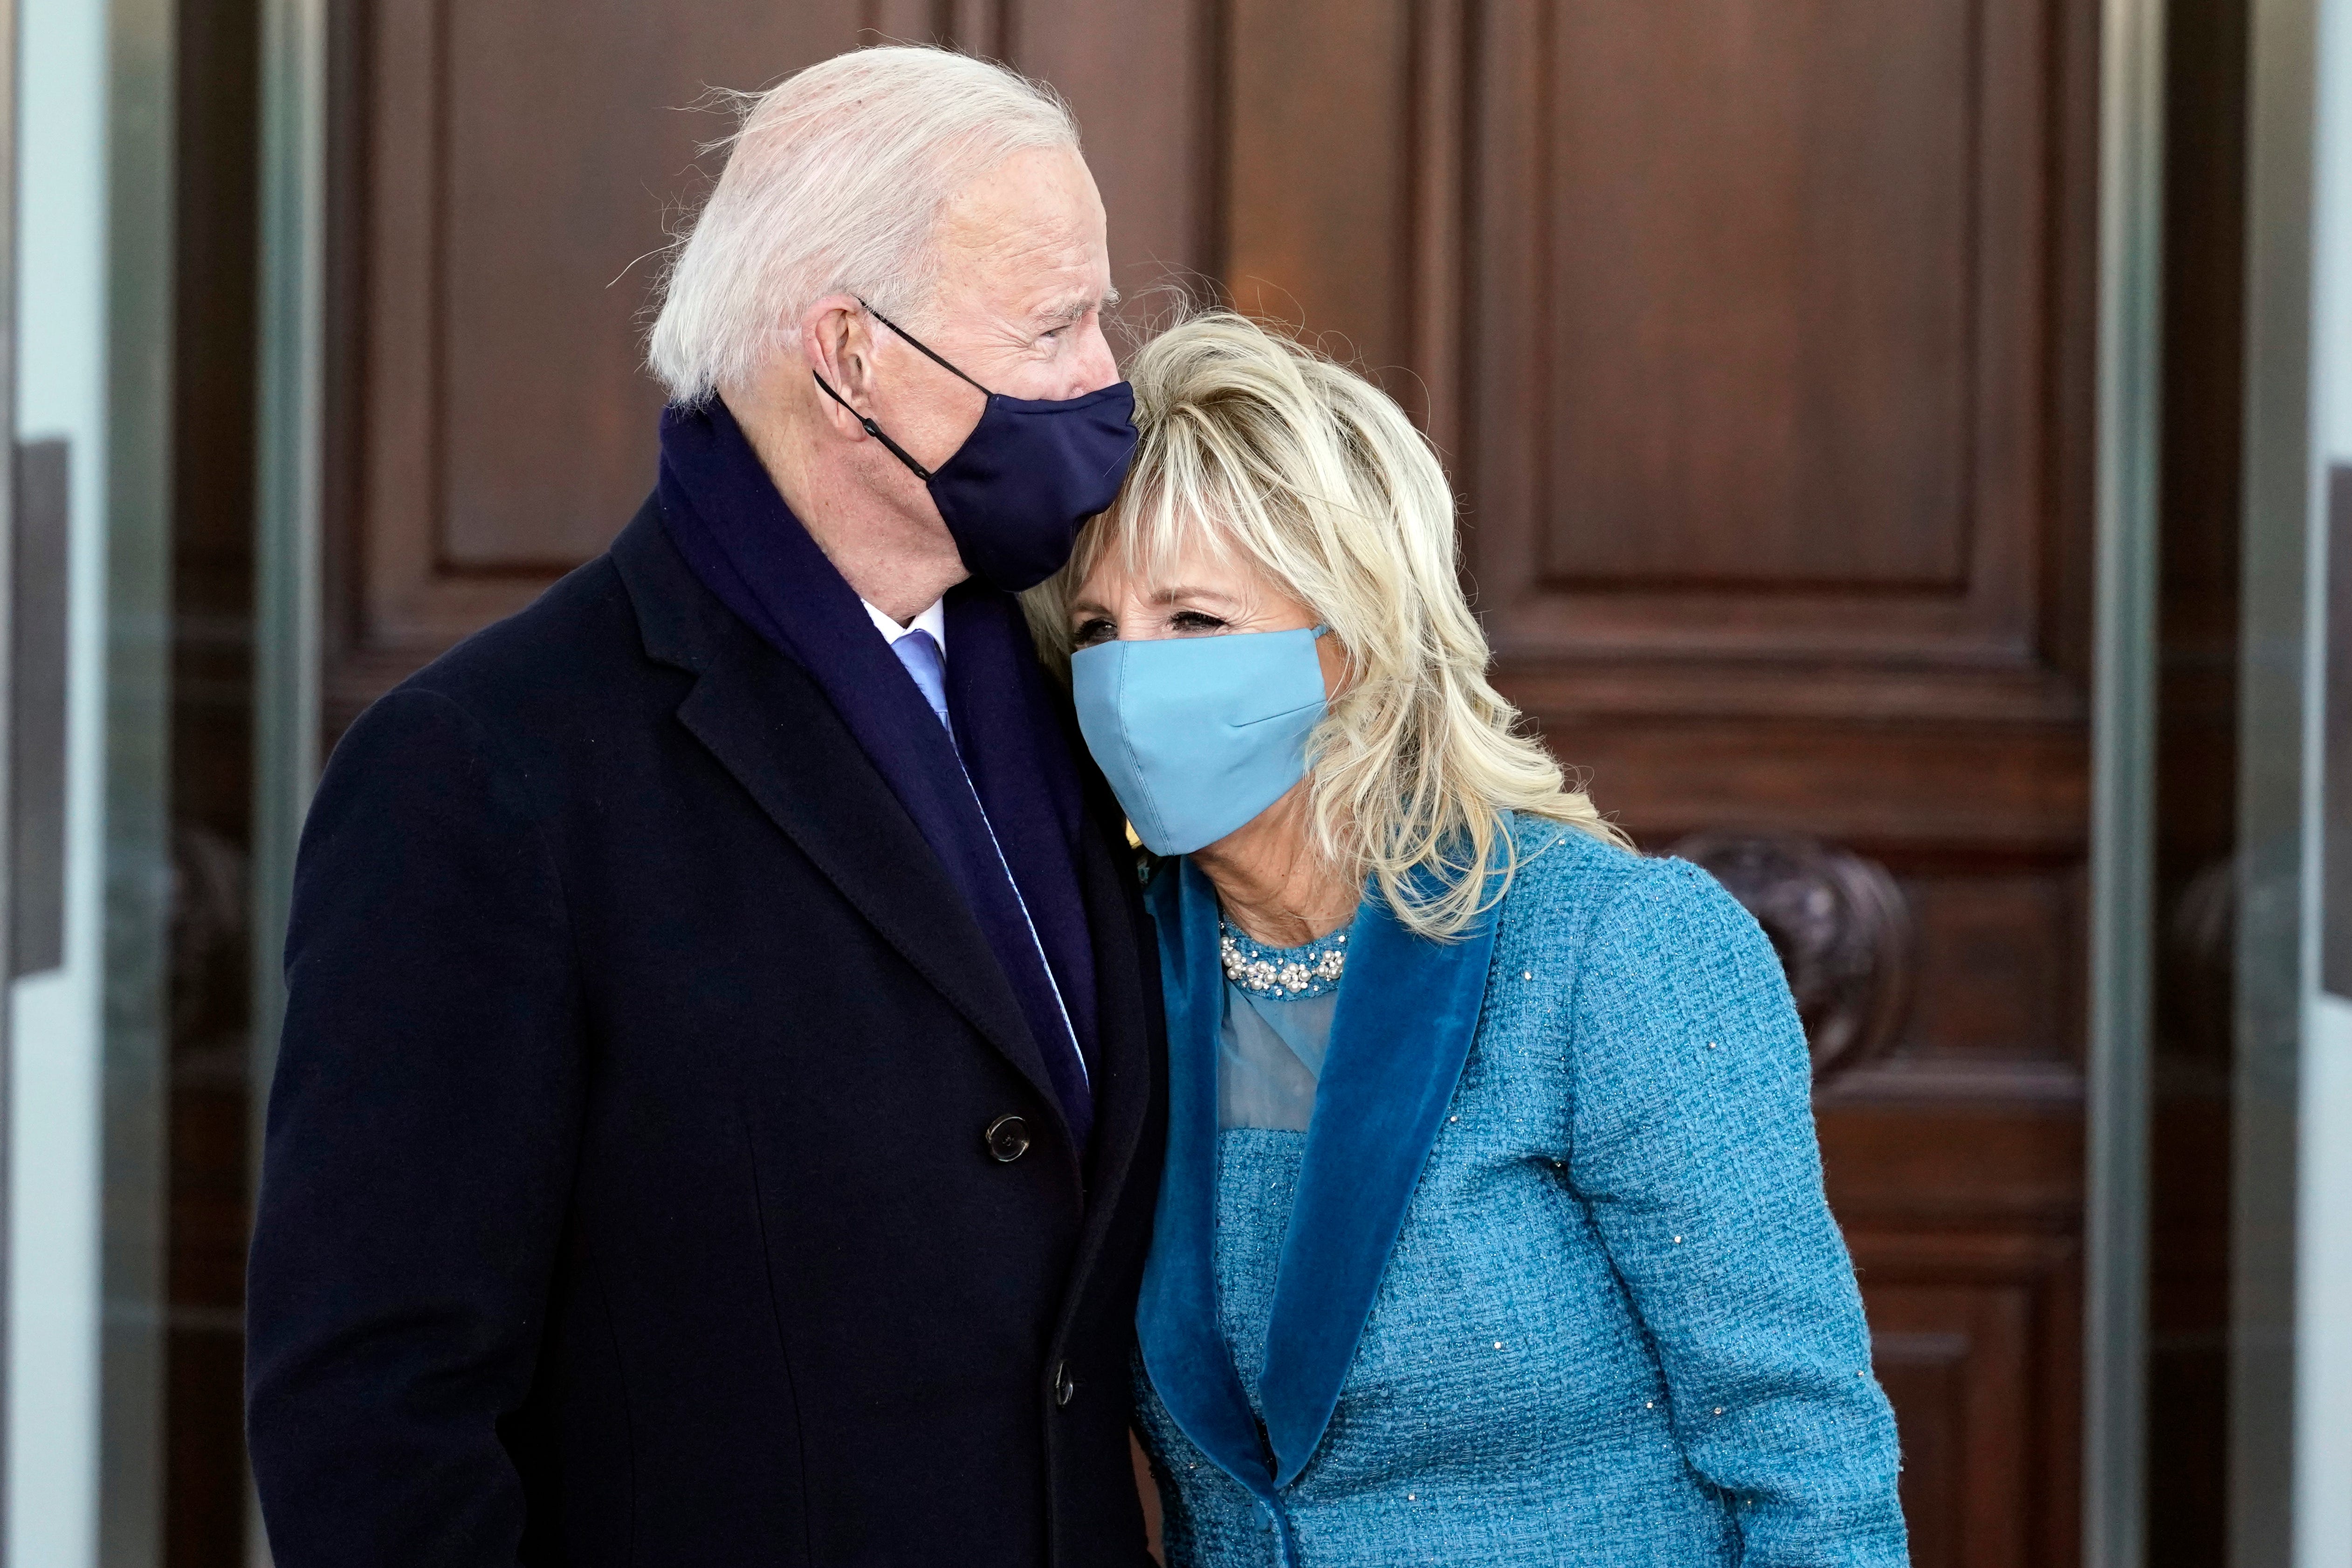 President Joe Biden and first lady Jill Biden hug as they arrive at the North Portico of the White House, Wednesday, Jan. 20, 2021, in Washington.